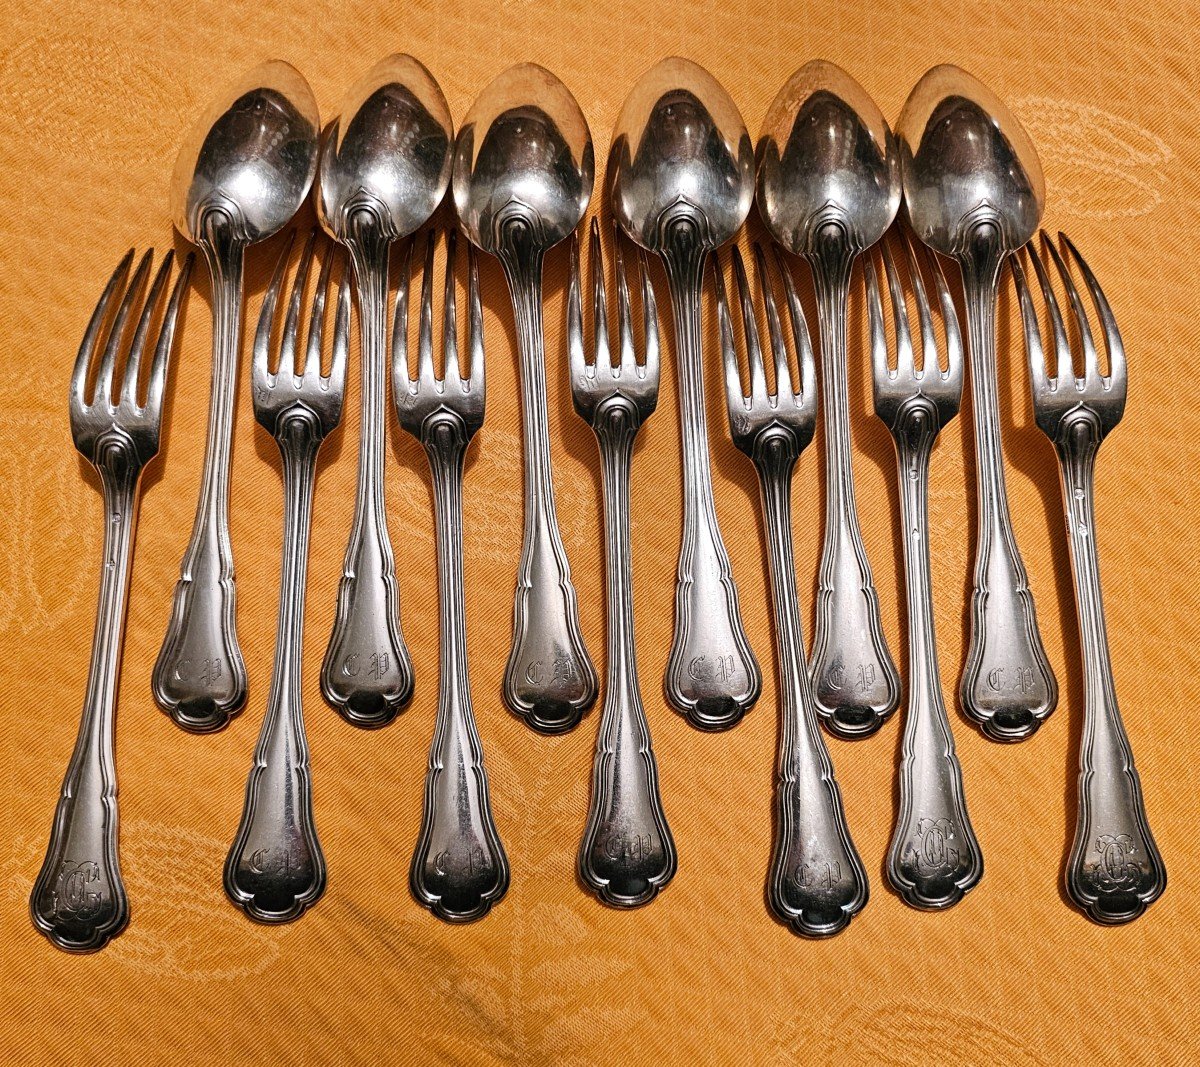 6 Spoons And 7 Forks In Silver Minerva Hallmark Weight 1117 Grams 